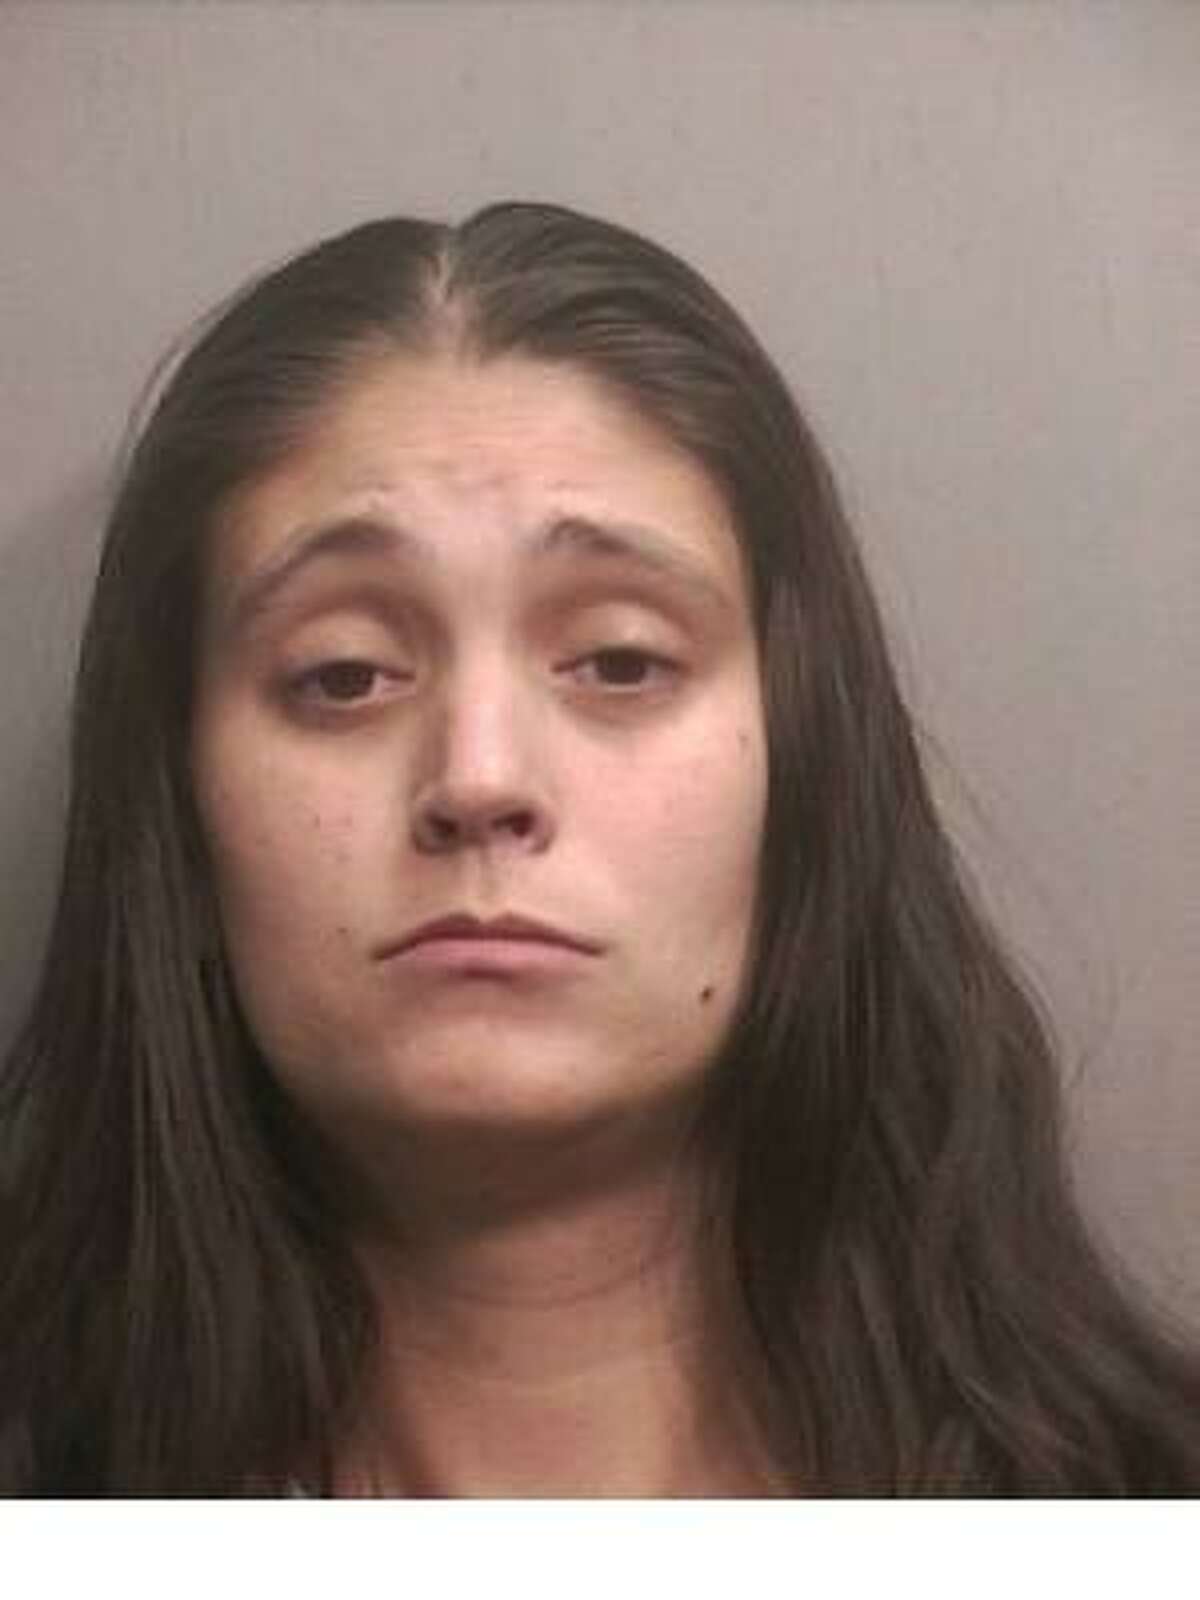 Jessica Leanne Hoosier, 26, is being held with no bond in connection with the death of her infant son.